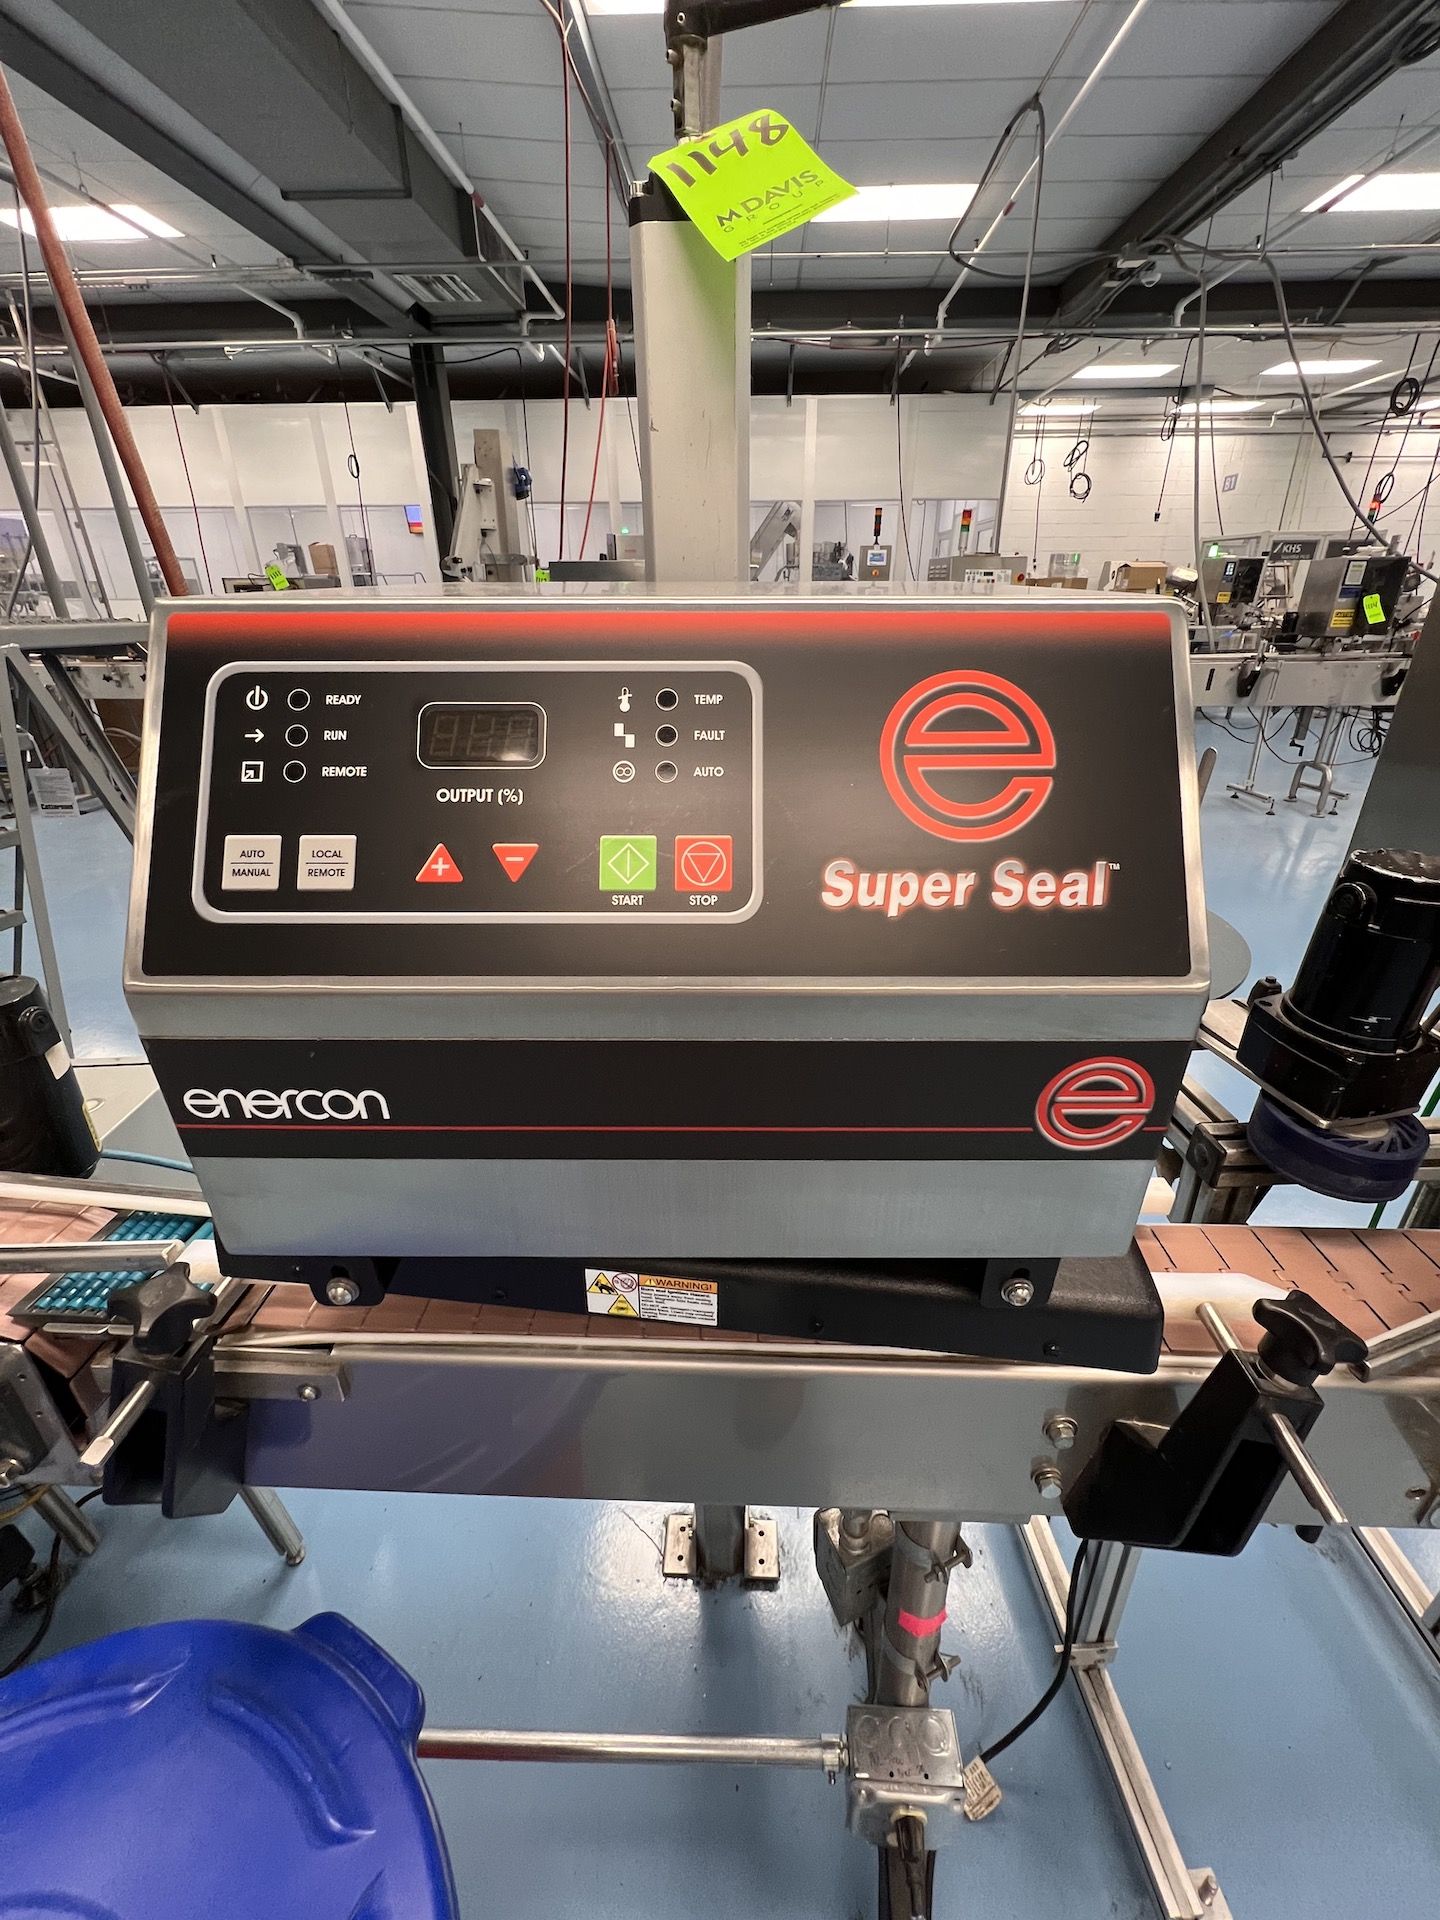 2019 ENERCON SUPERSEAL 100 INDUCTION SEALER, MODEL LM5022-222, S/N 151399-1-1, 240/3/50/60 - Image 2 of 7